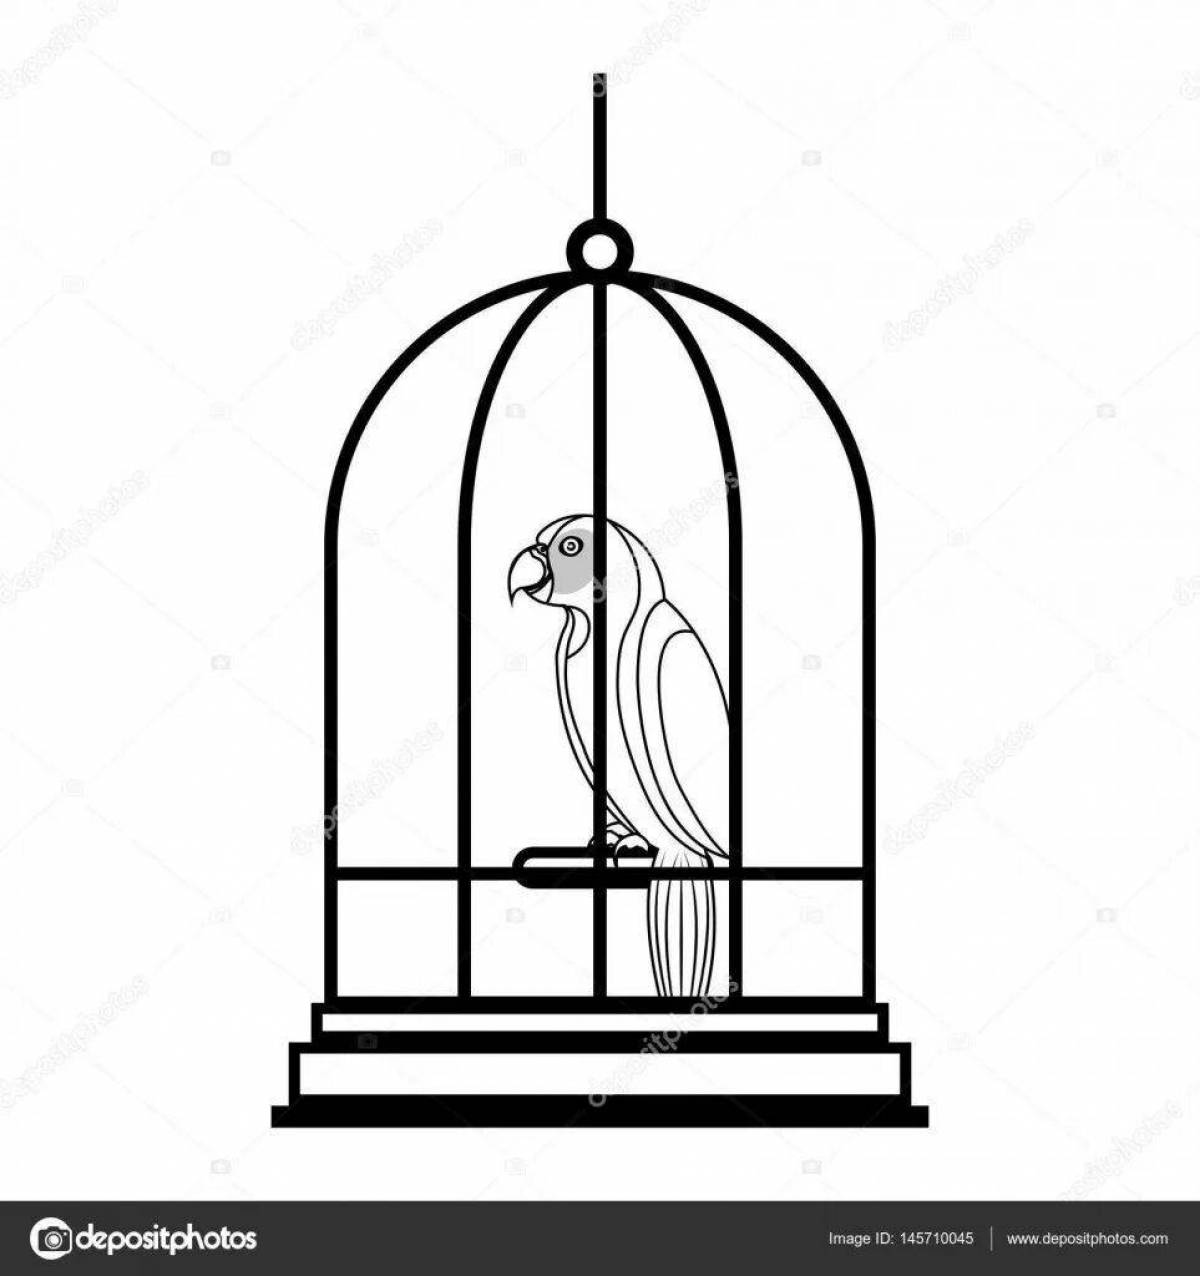 Caged parrot #3